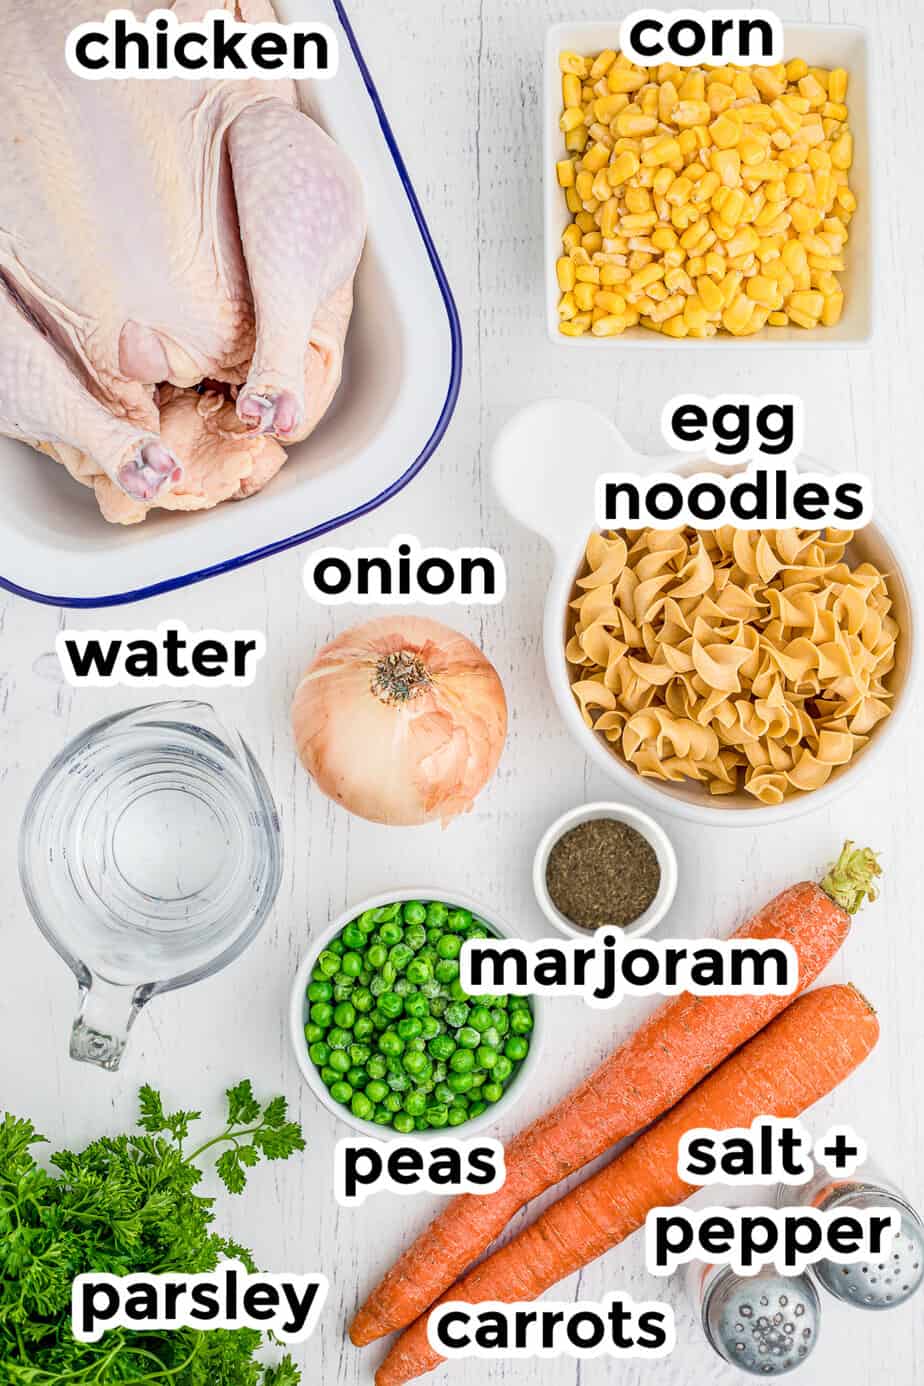 Ingredients for slow cooker chicken noodle soup in bowls on a counter from overhead with text labels.